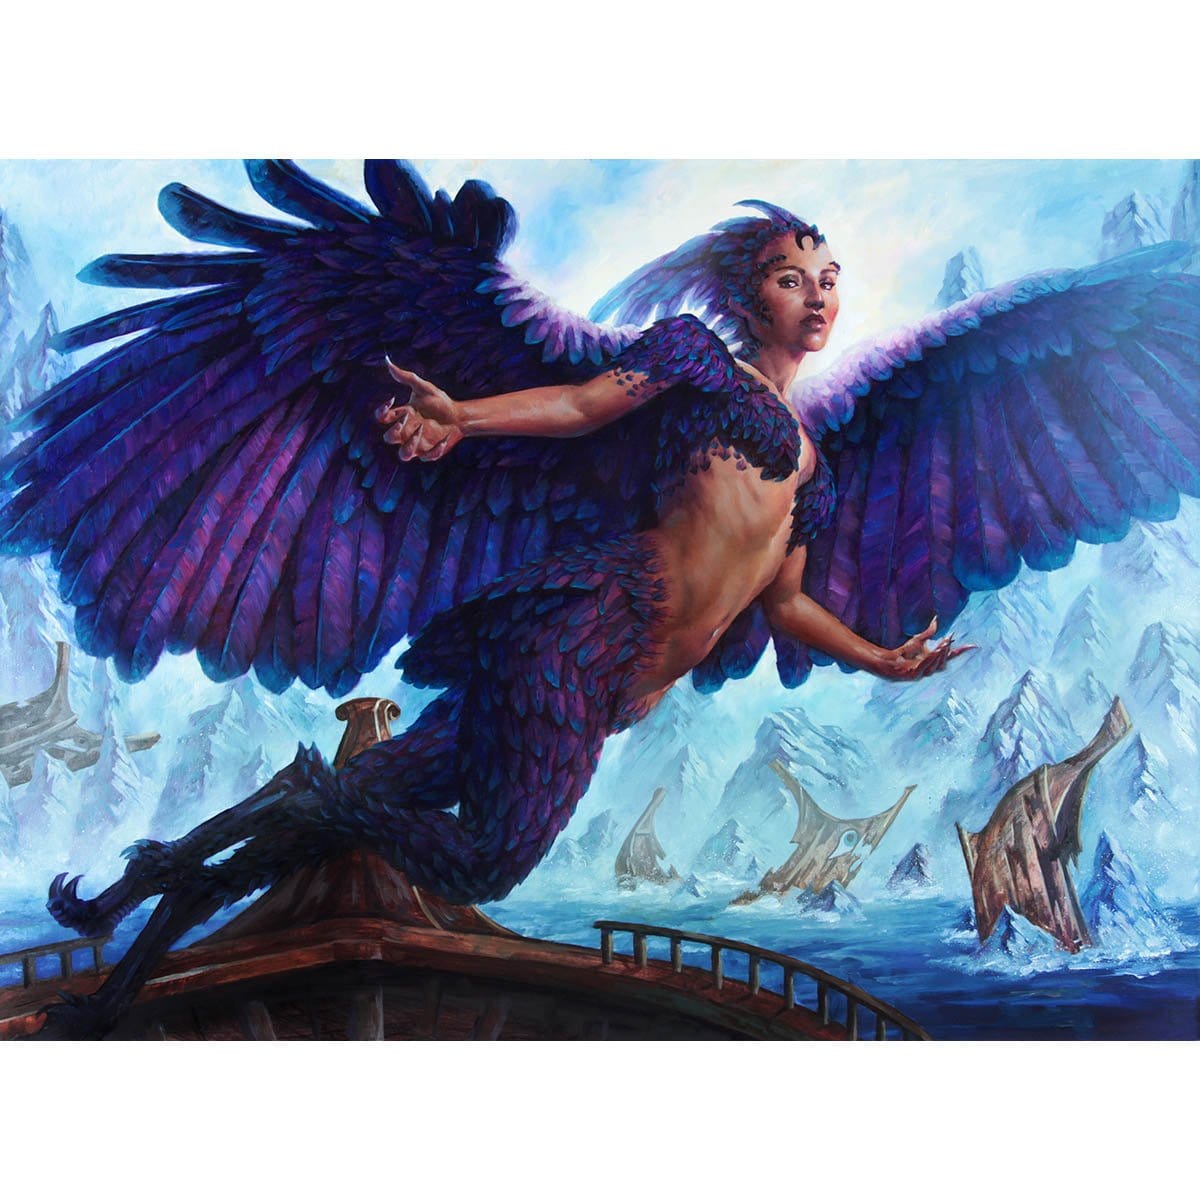 Siren of the Fanged Coast Print - Print - Original Magic Art - Accessories for Magic the Gathering and other card games